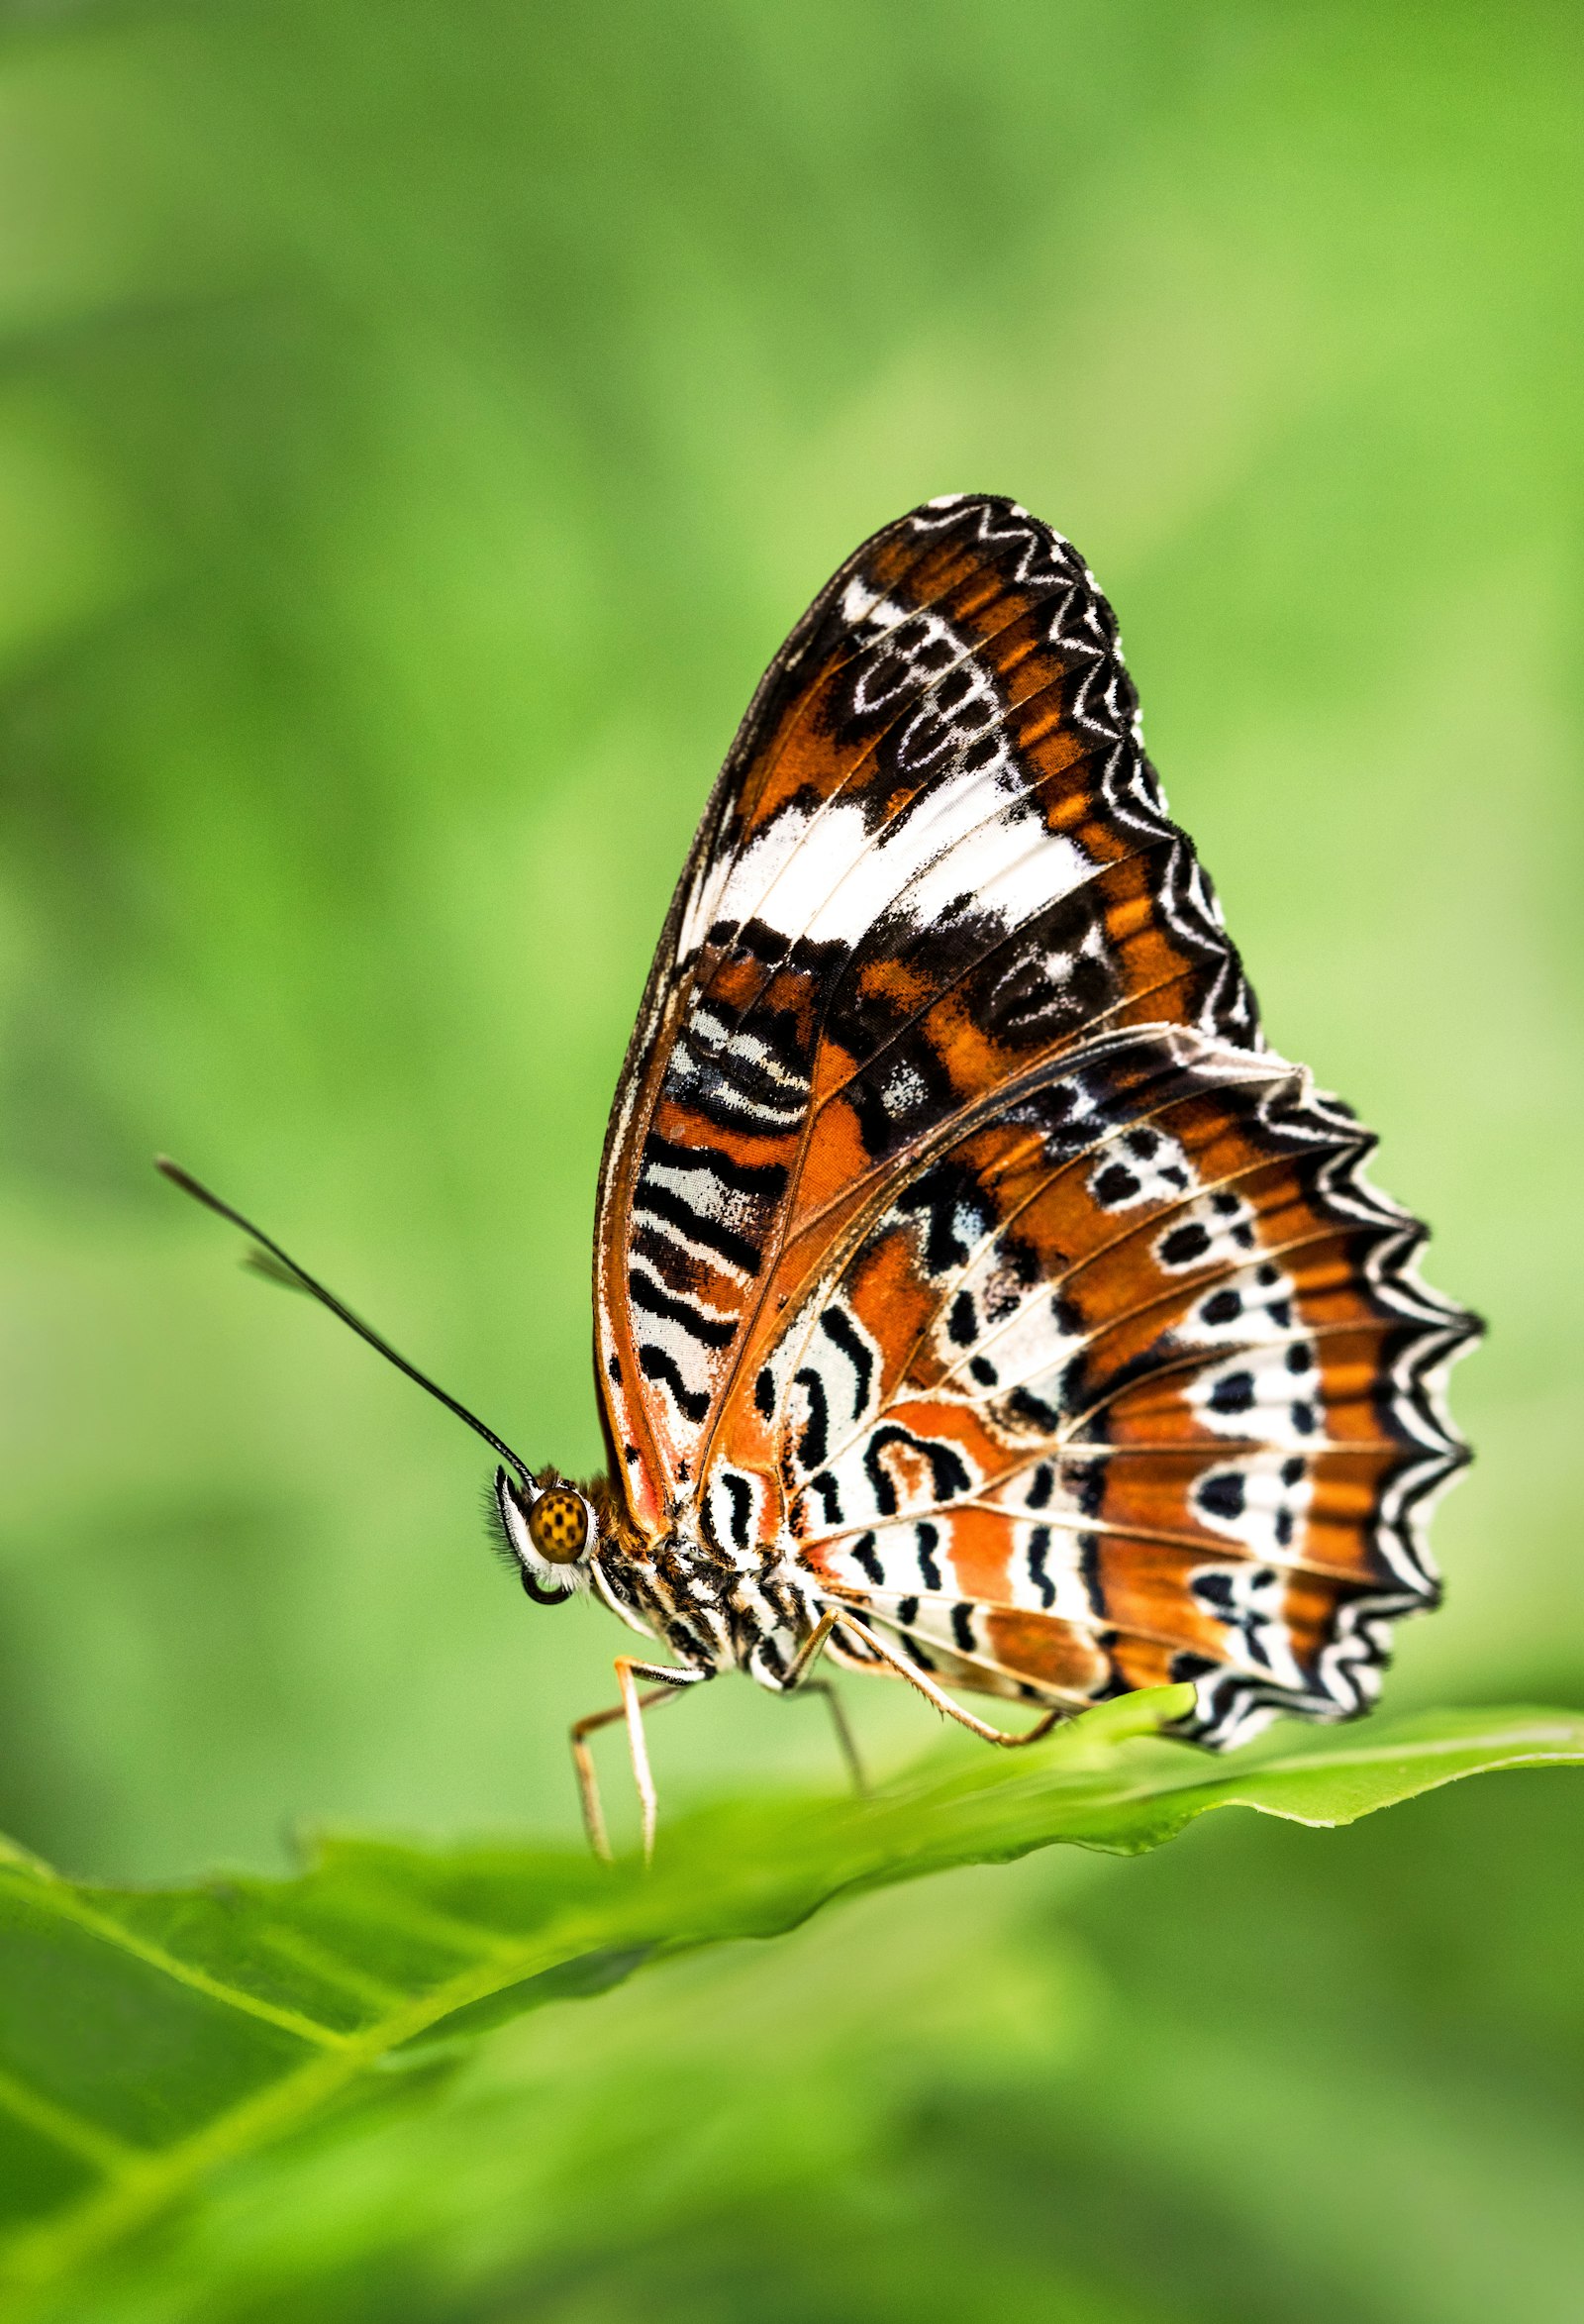 Tamron SP 90mm F2.8 Di VC USD 1:1 Macro (F004) sample photo. Leopard lacewing butterfly perched photography